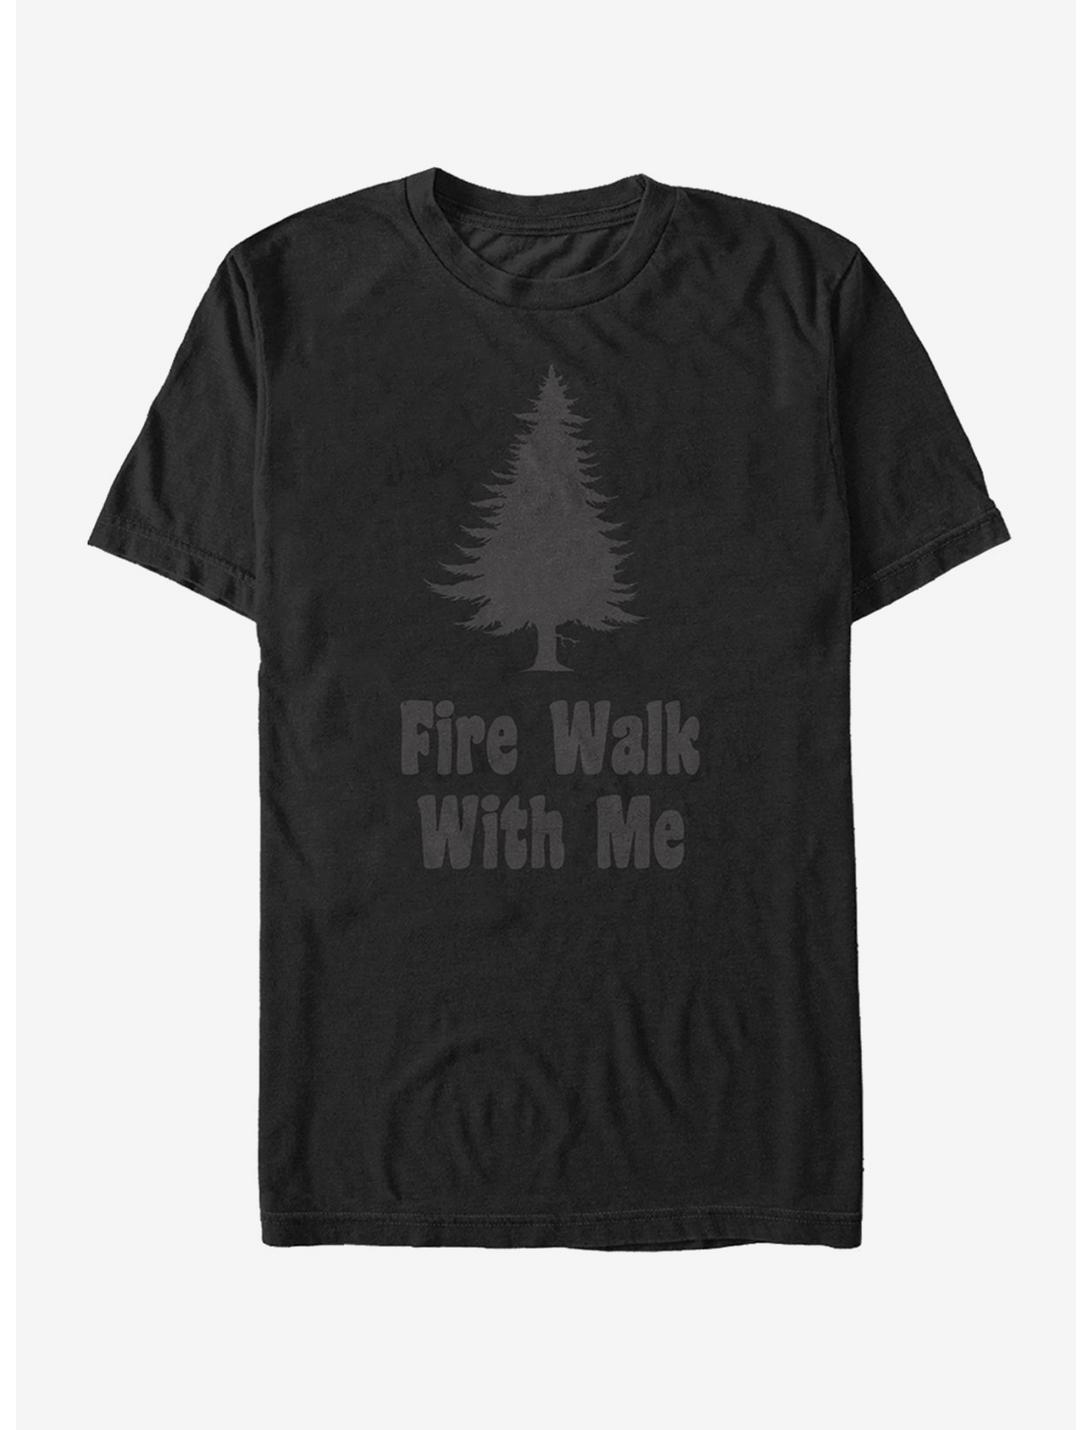 Twin Peaks Fire Walk With Me T-Shirt, BLACK, hi-res